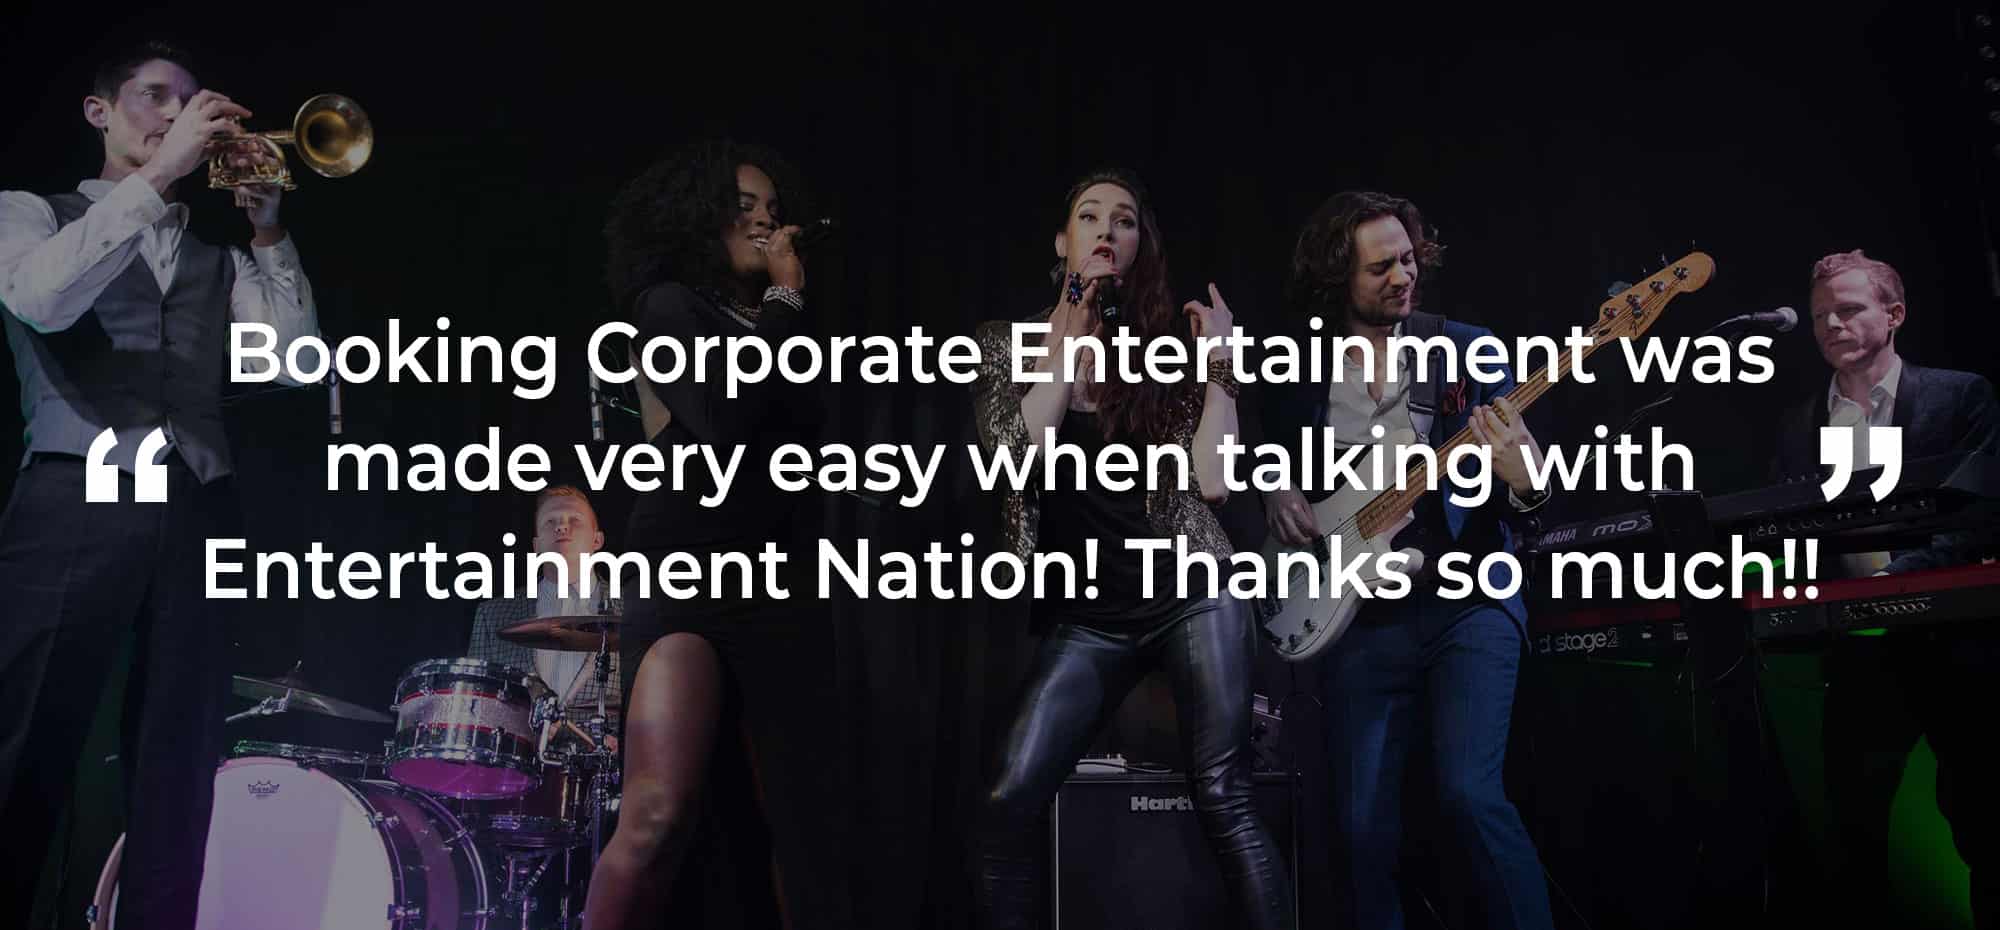 Review of Corporate Entertainment York